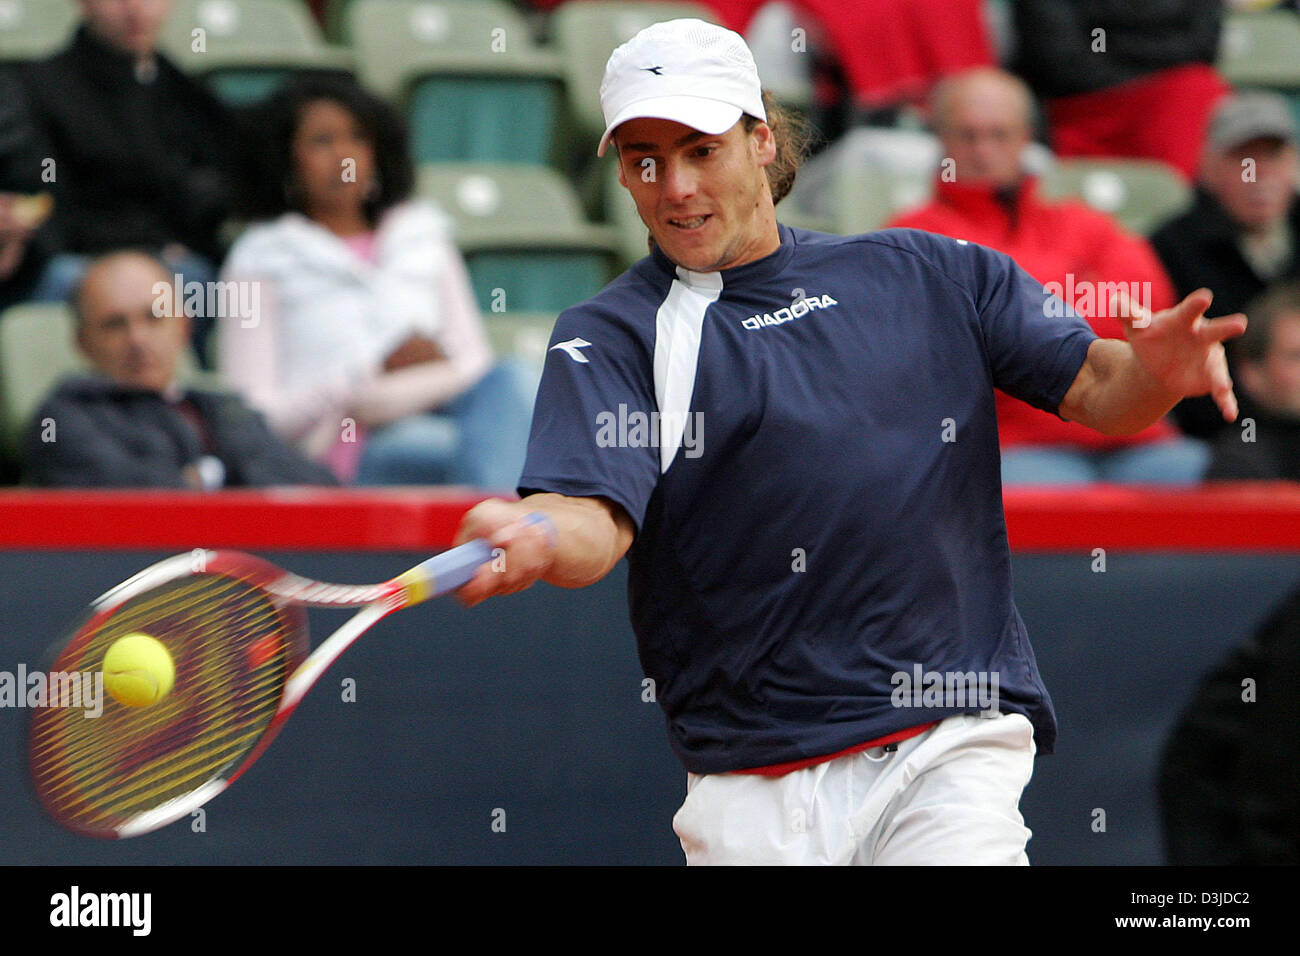 Dpa argentinian tennis pro gaudi hi-res stock photography and images - Alamy